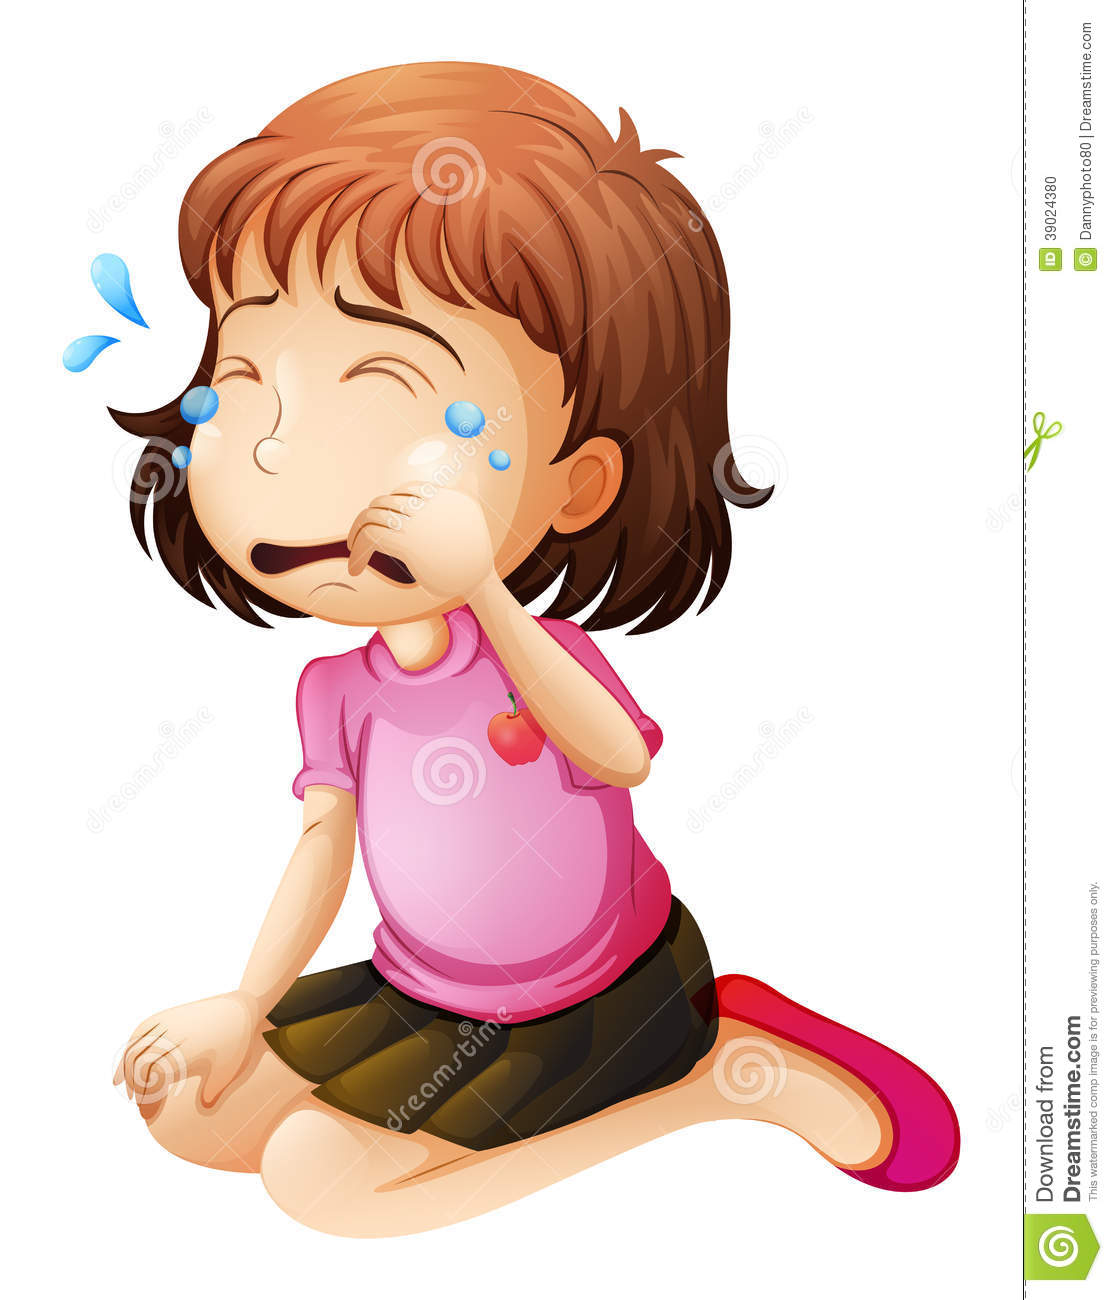 Illustration Of A Little Girl Crying On A White Background